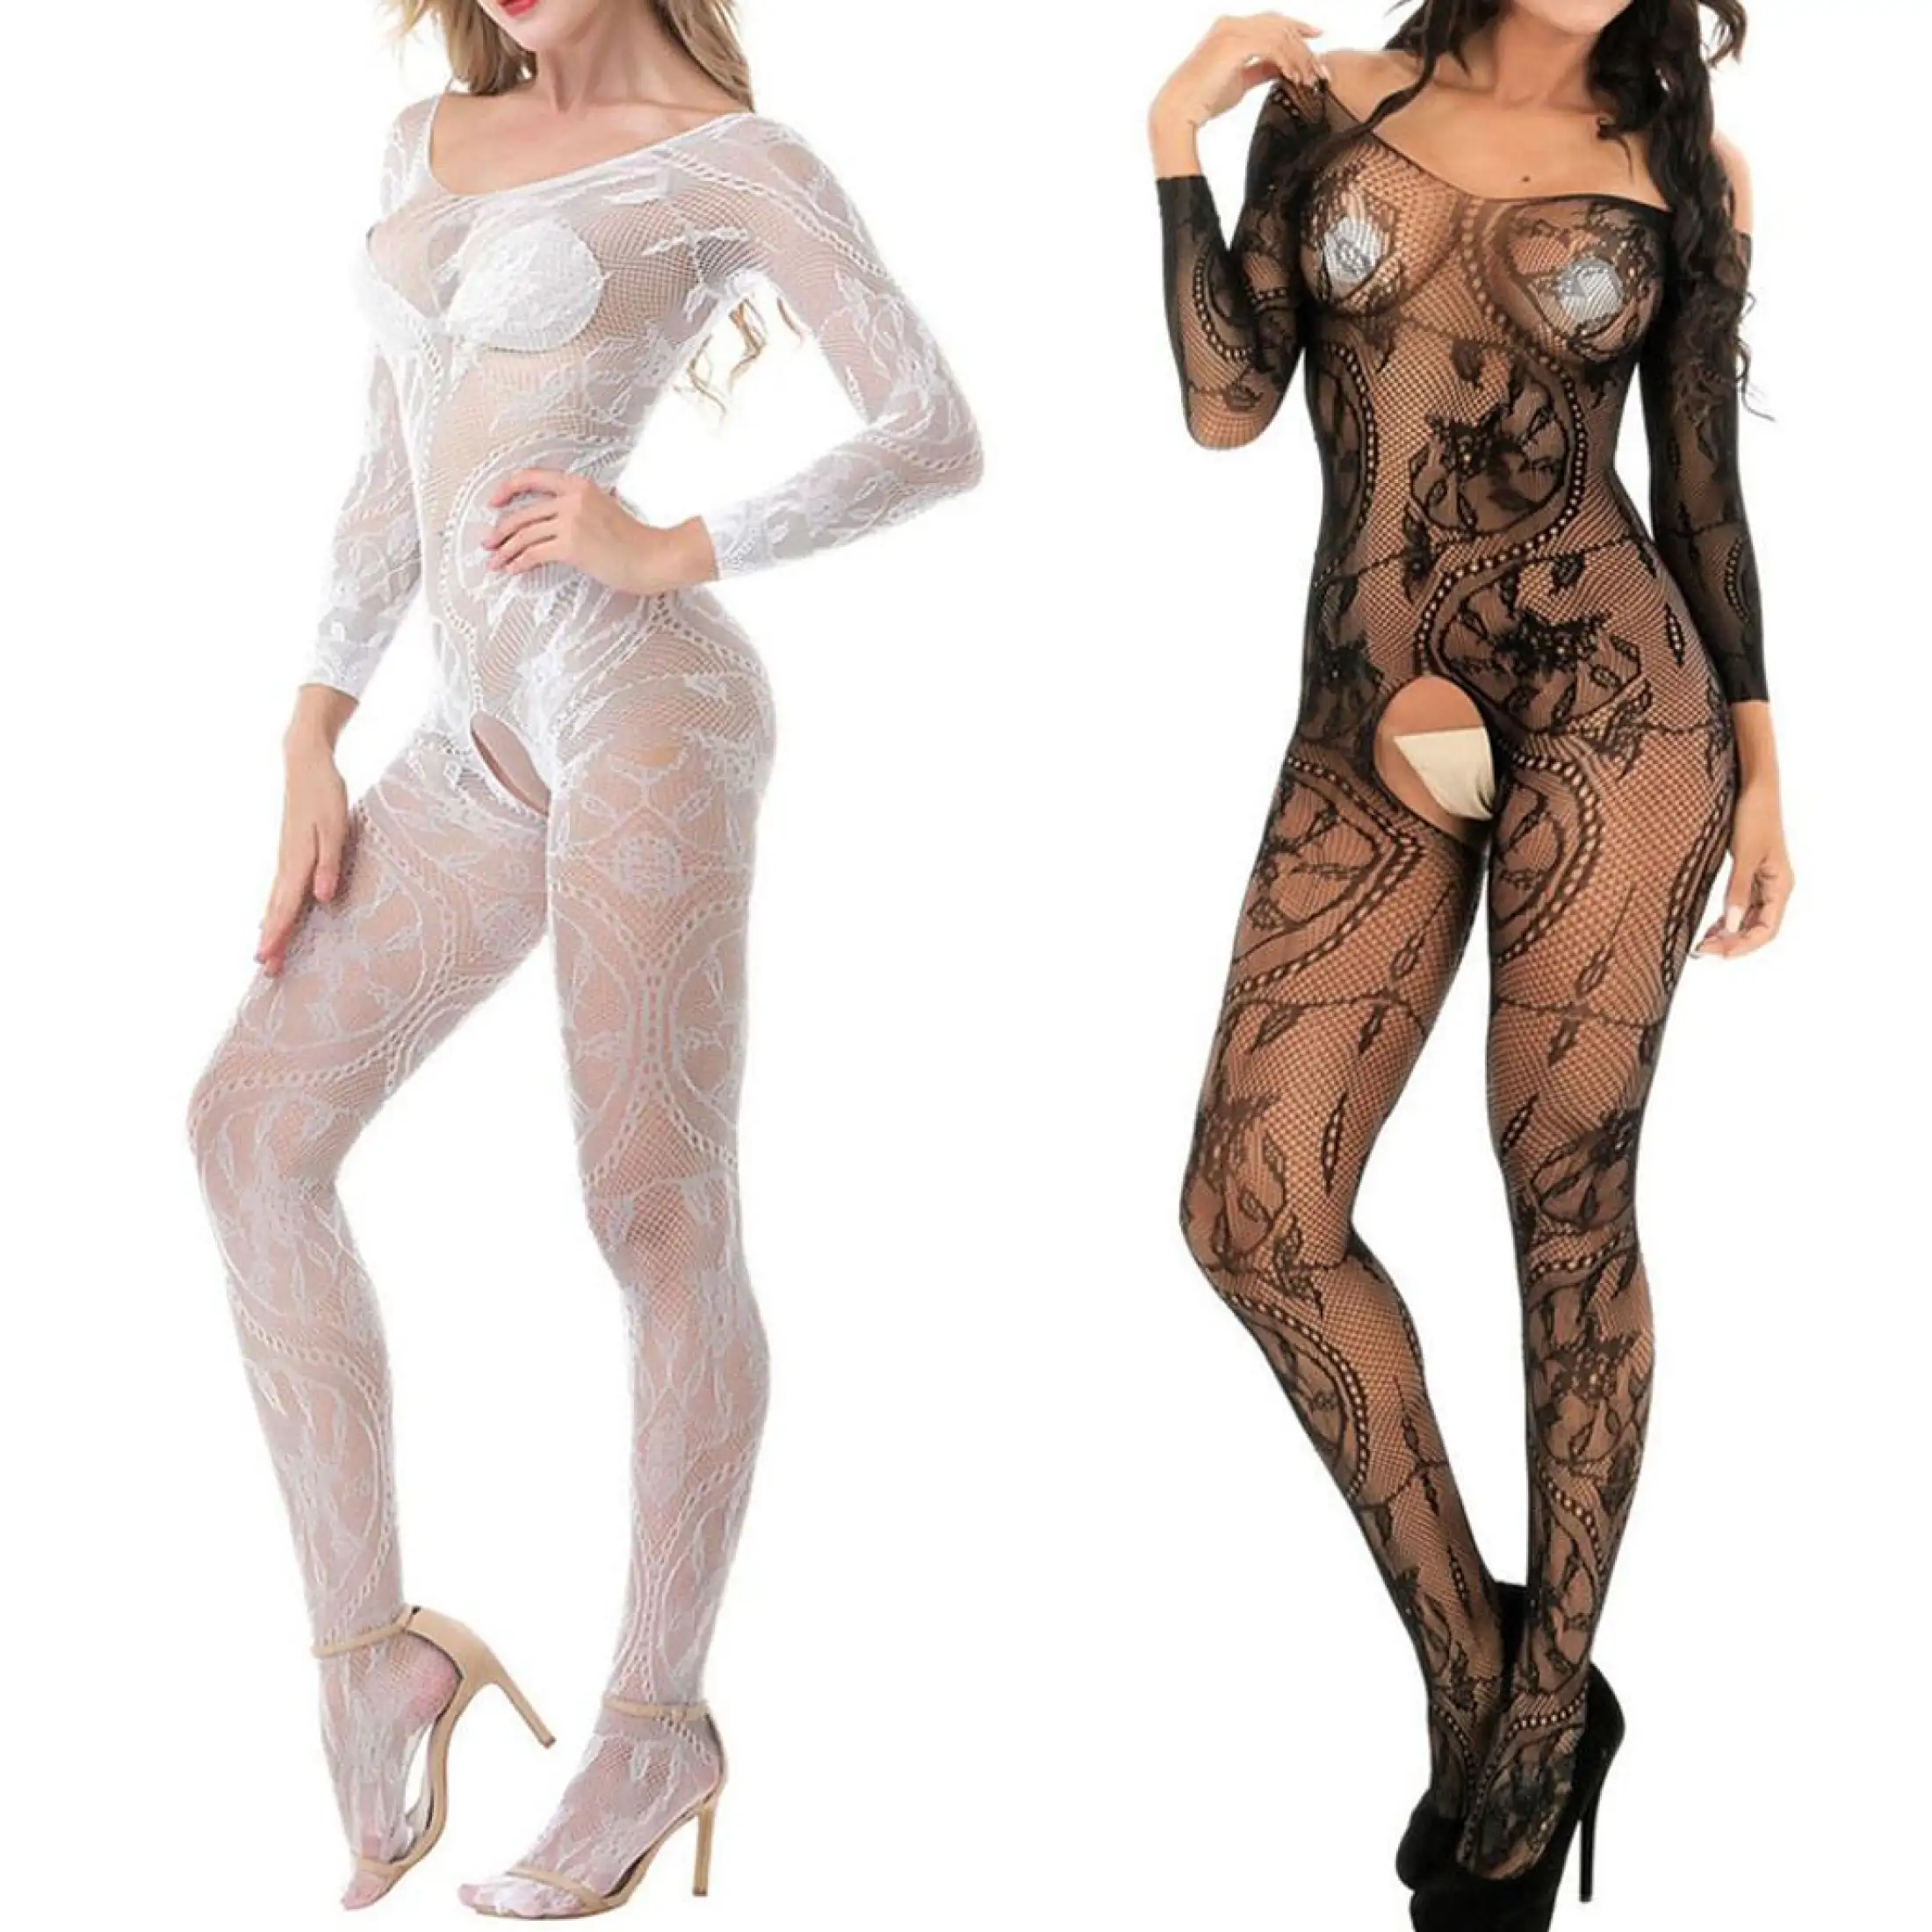 Body stocking gurl best adult free image